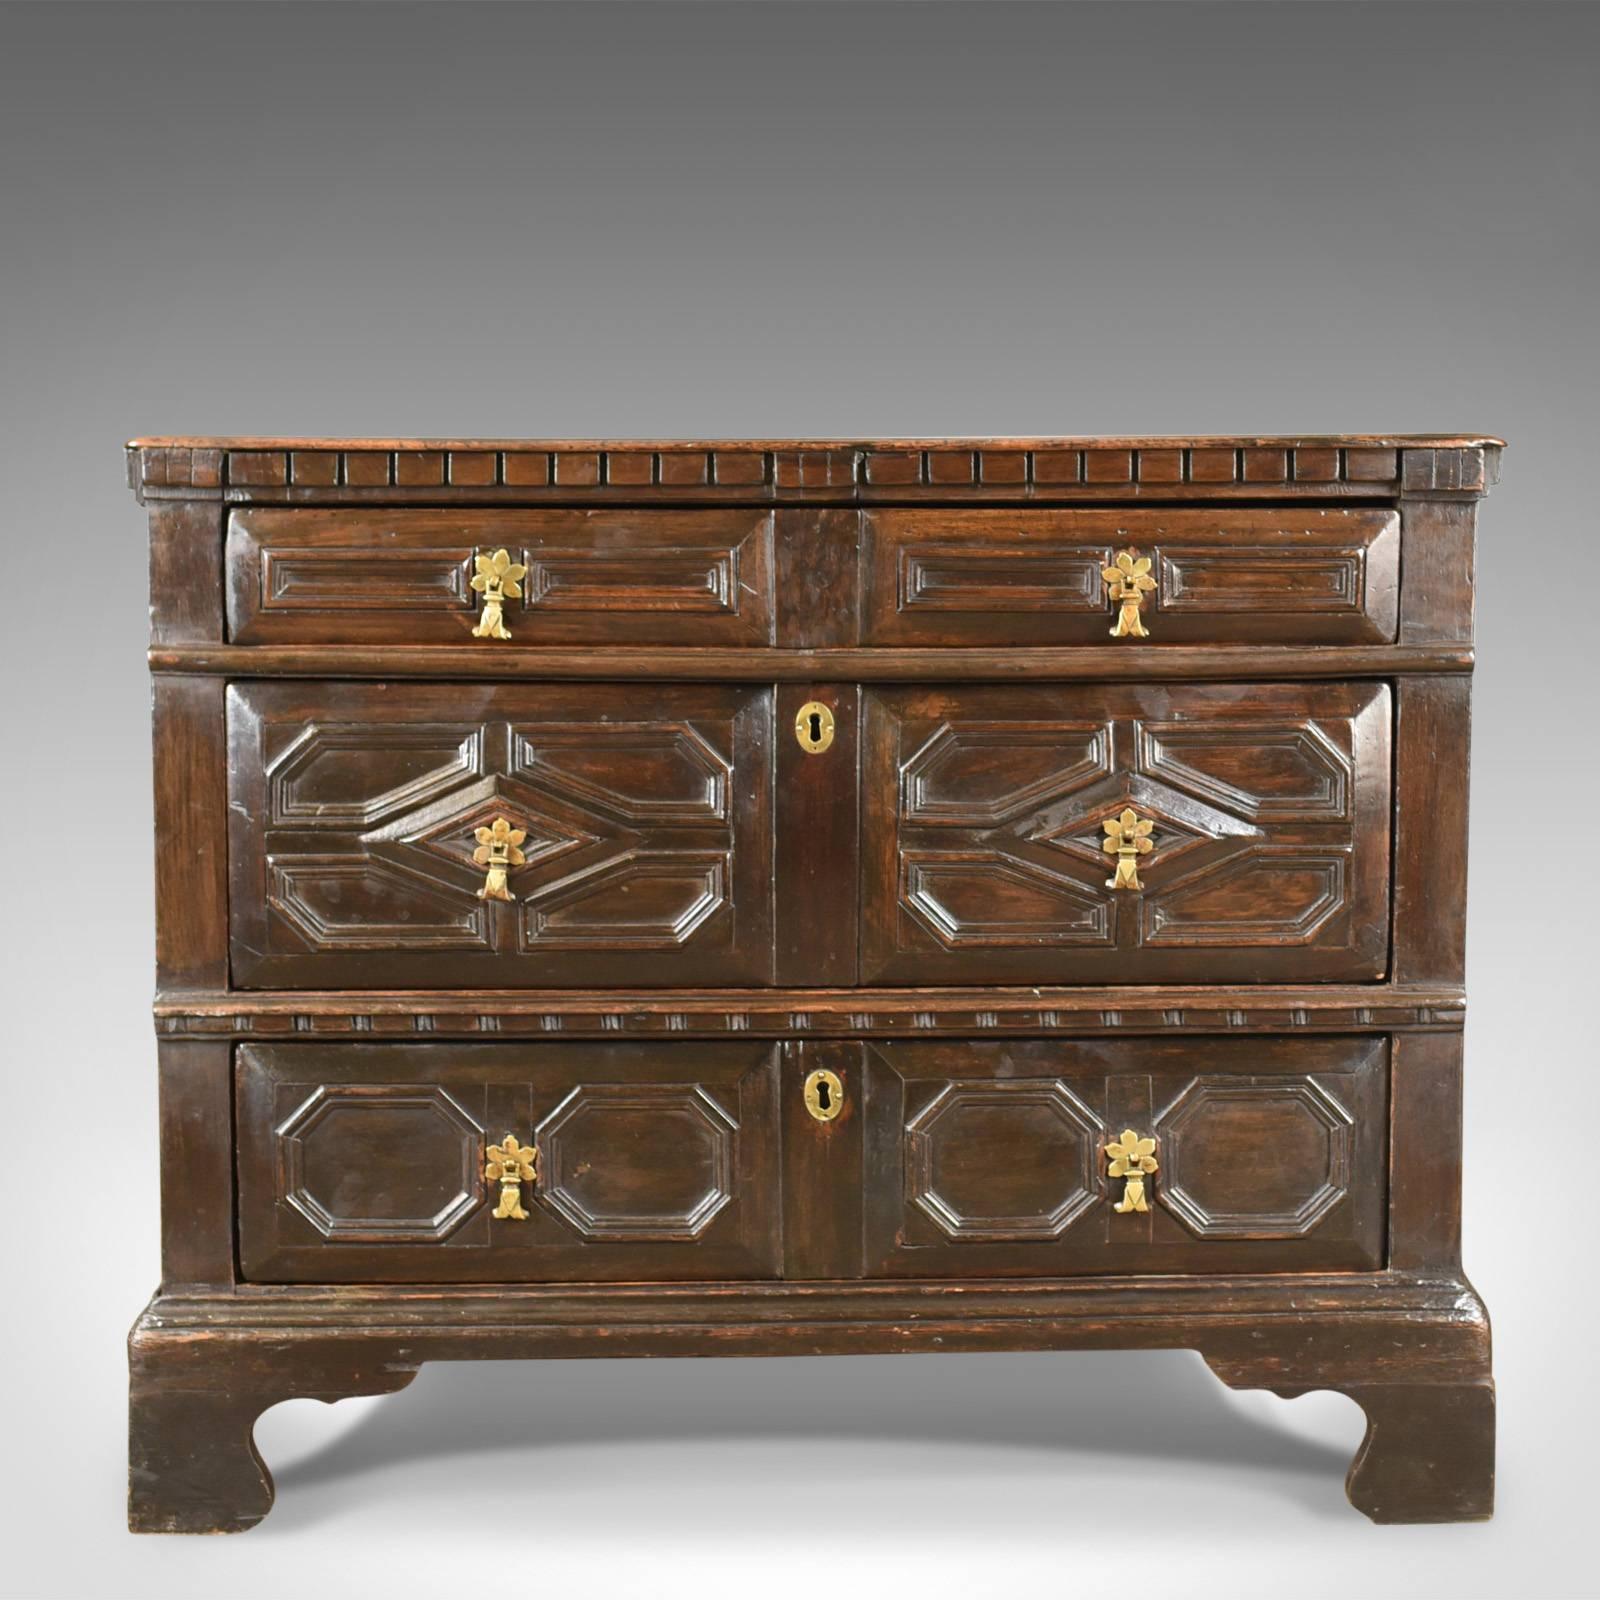 This is an antique chest of drawers, 17th century and later in English oak dating to circa 1690.

Classic 17th century styling in the geometric decoration
Desirable aged patina to the dark wax polished finish
Appealing proportions in the squat